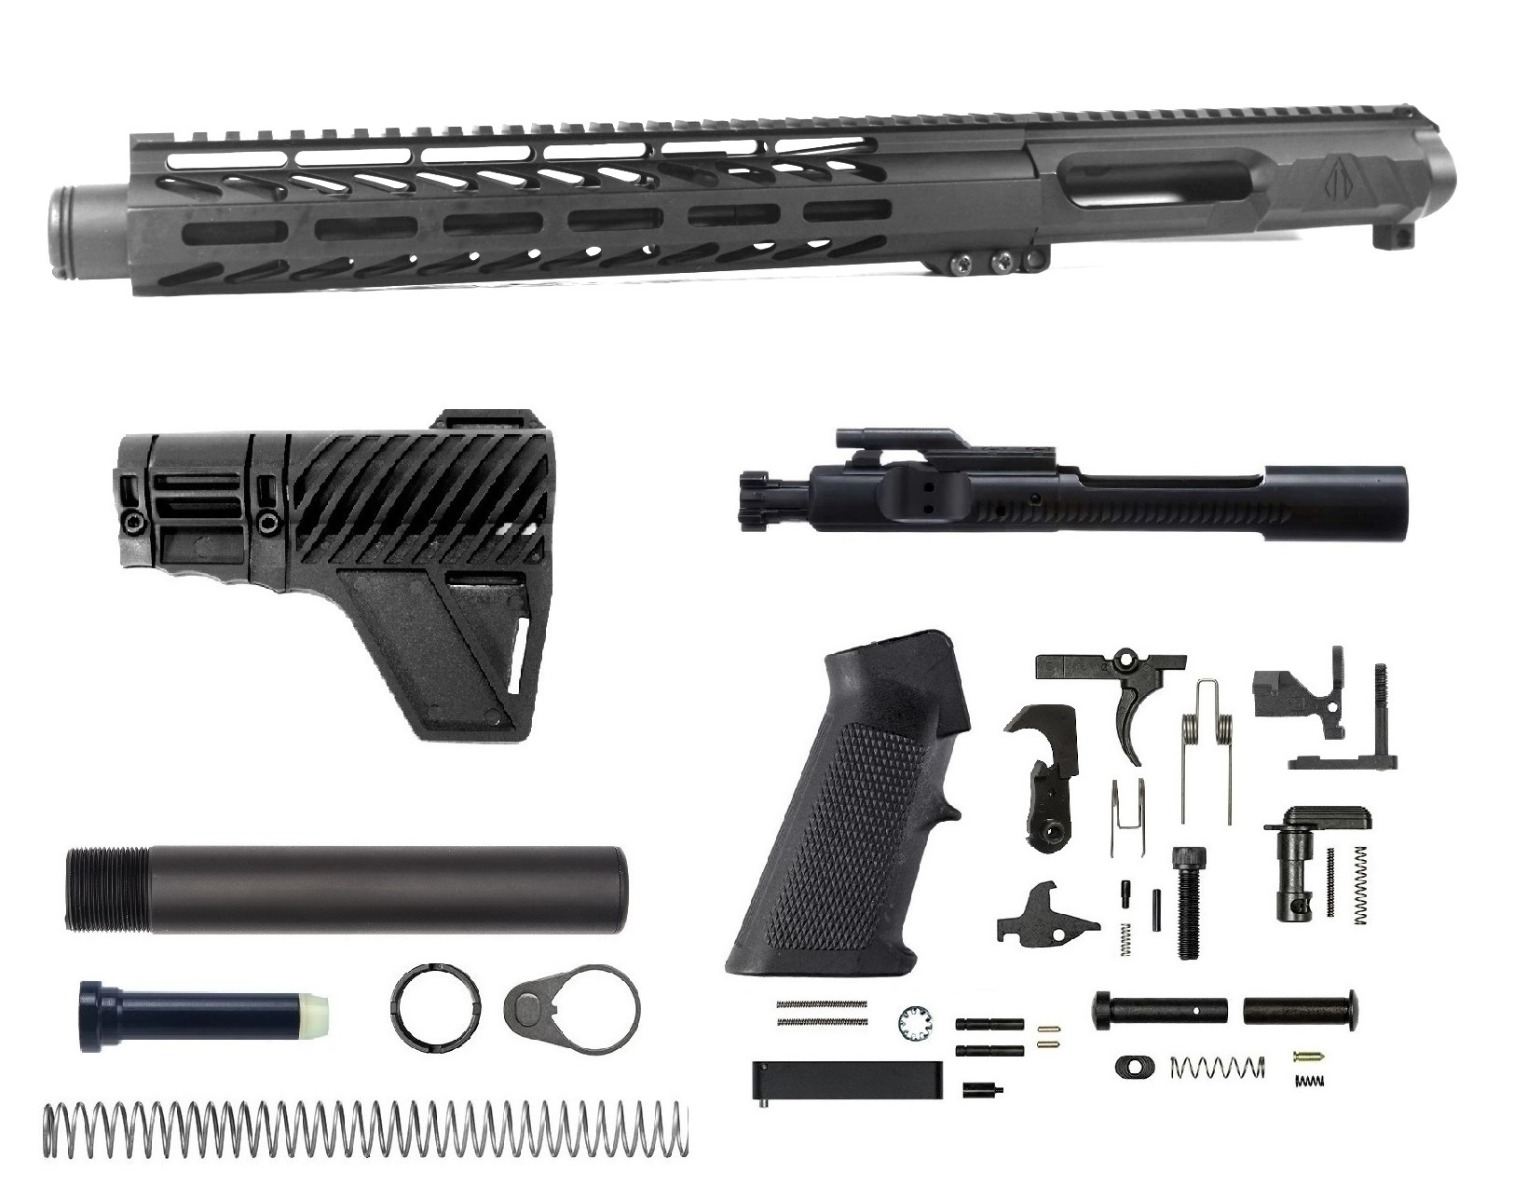 10.5 inch 300 Blackout Left Hand Side Charging Upper Kit | Pro2a Tactical